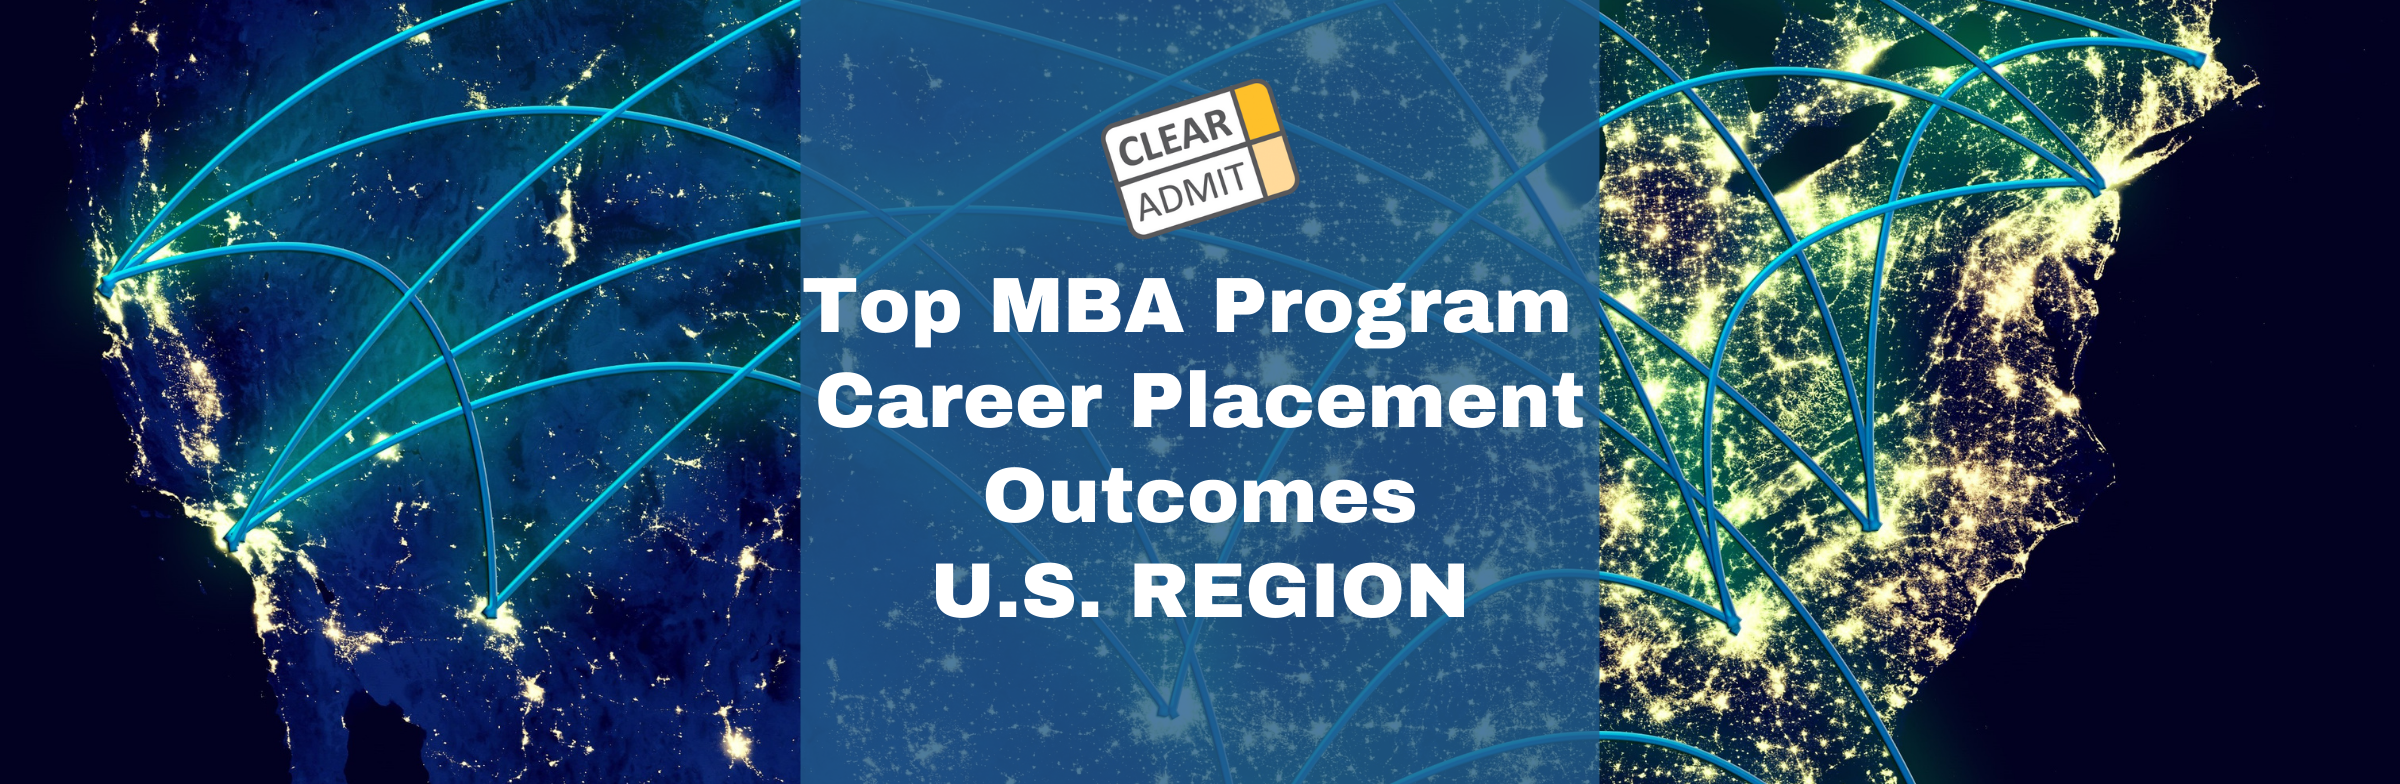 Image for Top MBA Program Career Placement Outcomes: U.S. Region